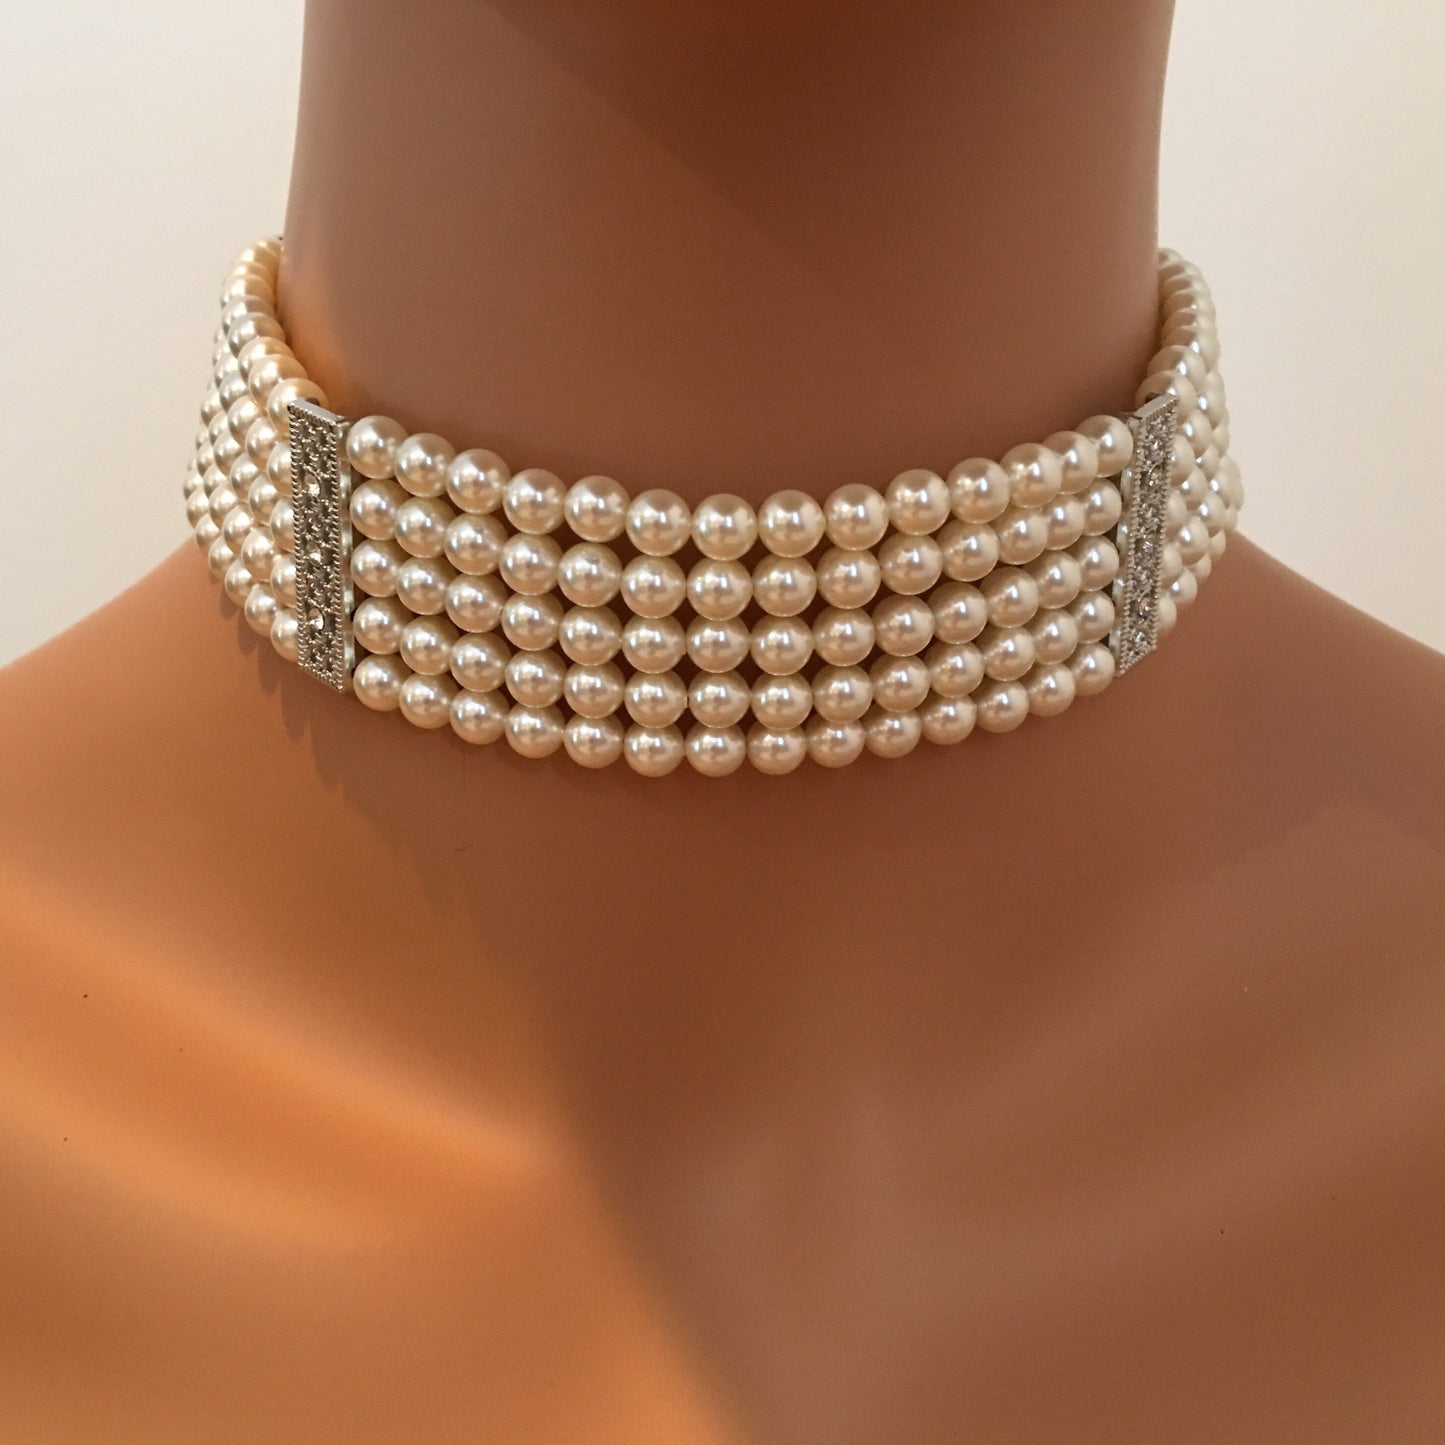 Wedding Choker Pearl Necklace with backdrop 5 multi strand glass Pearls in Cream Ivory White or your choice of color Art Deco Gatsby